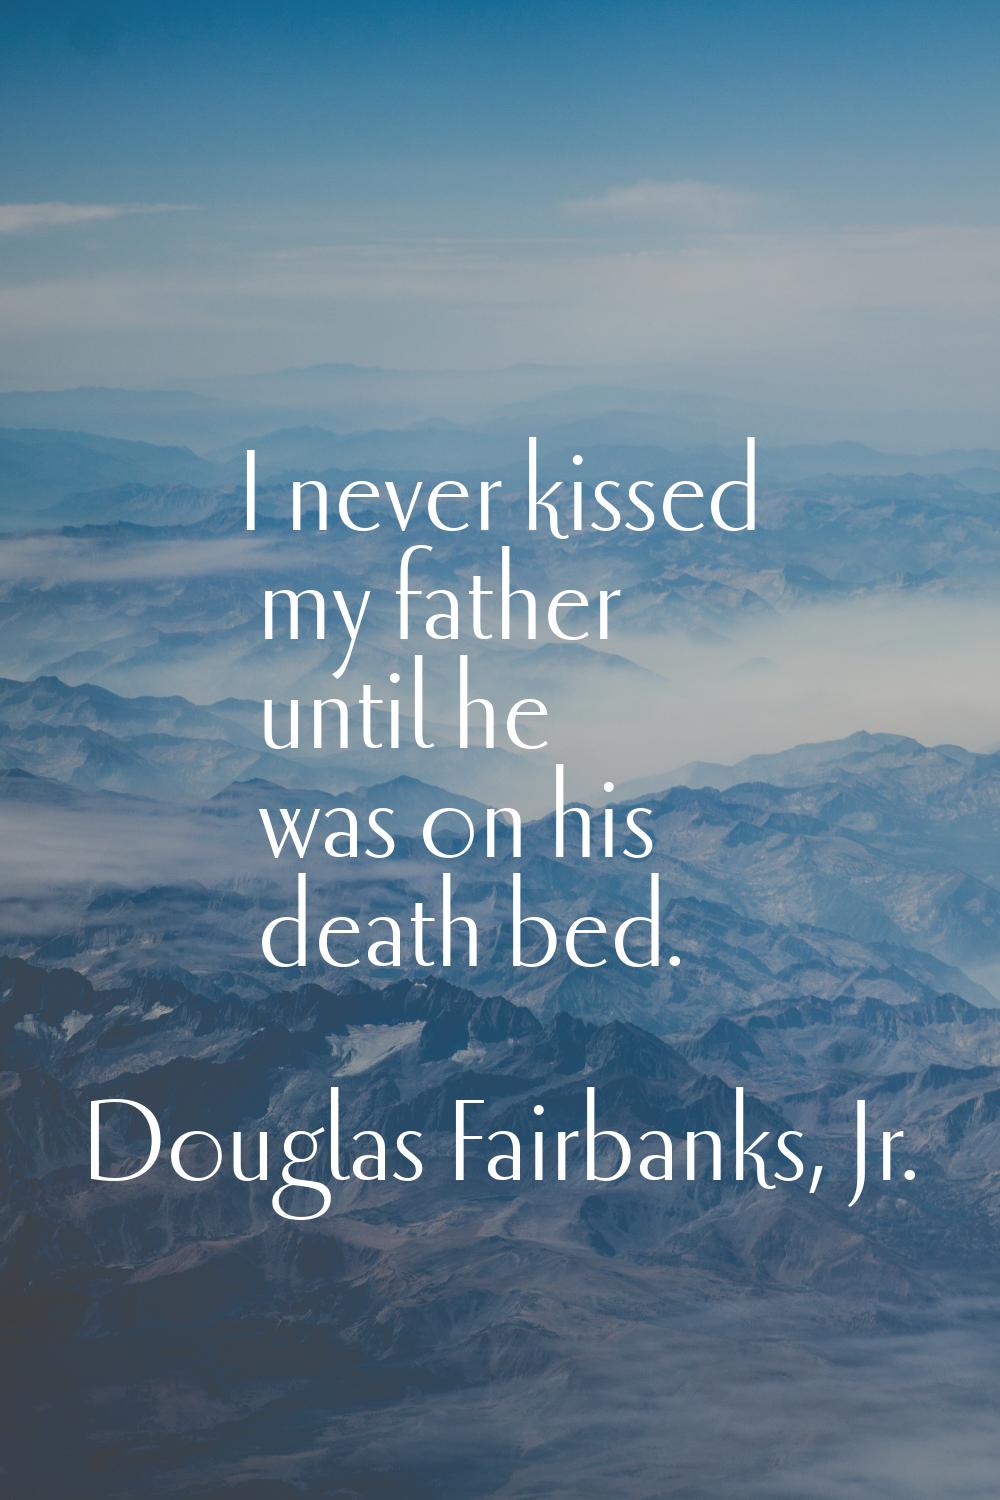 I never kissed my father until he was on his death bed.